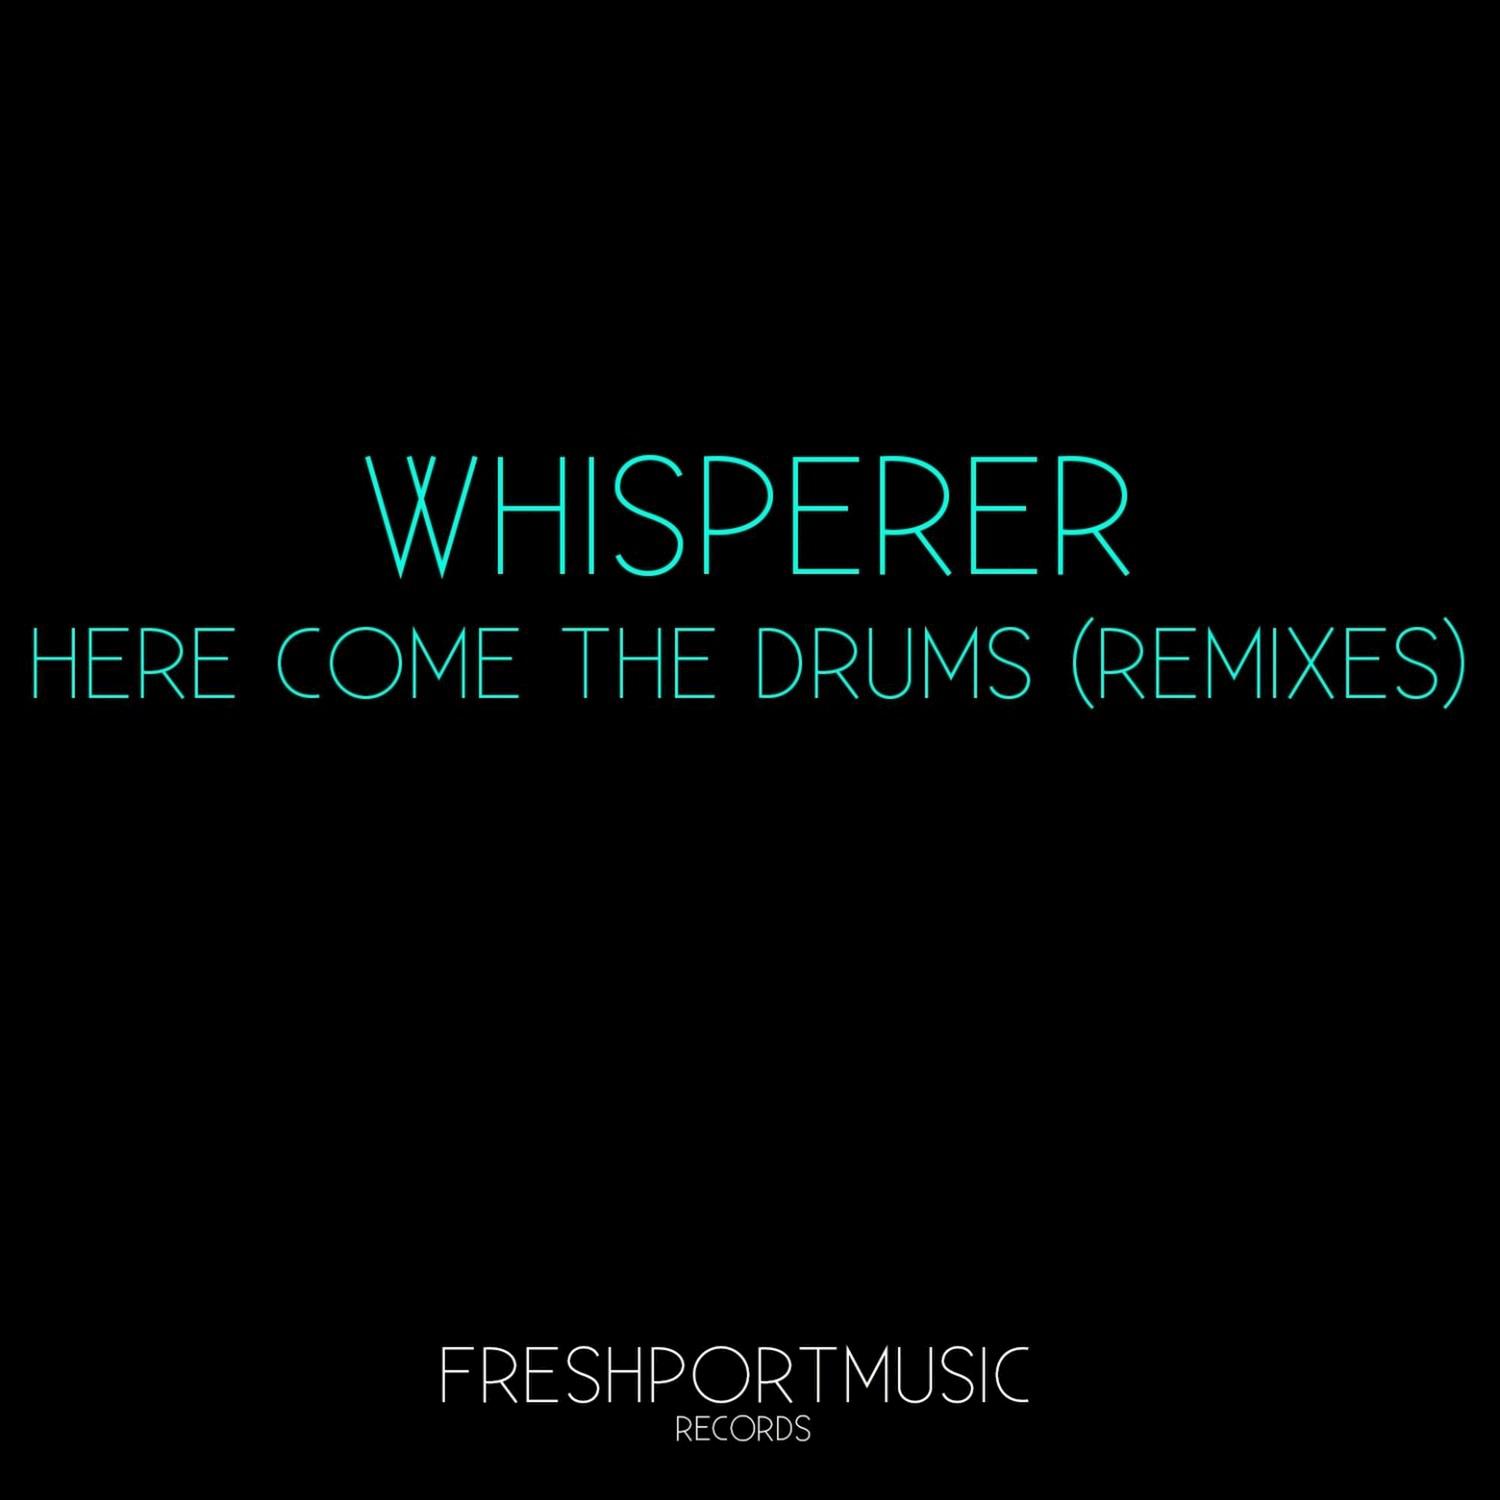 Here Come the Drums (Remixes)